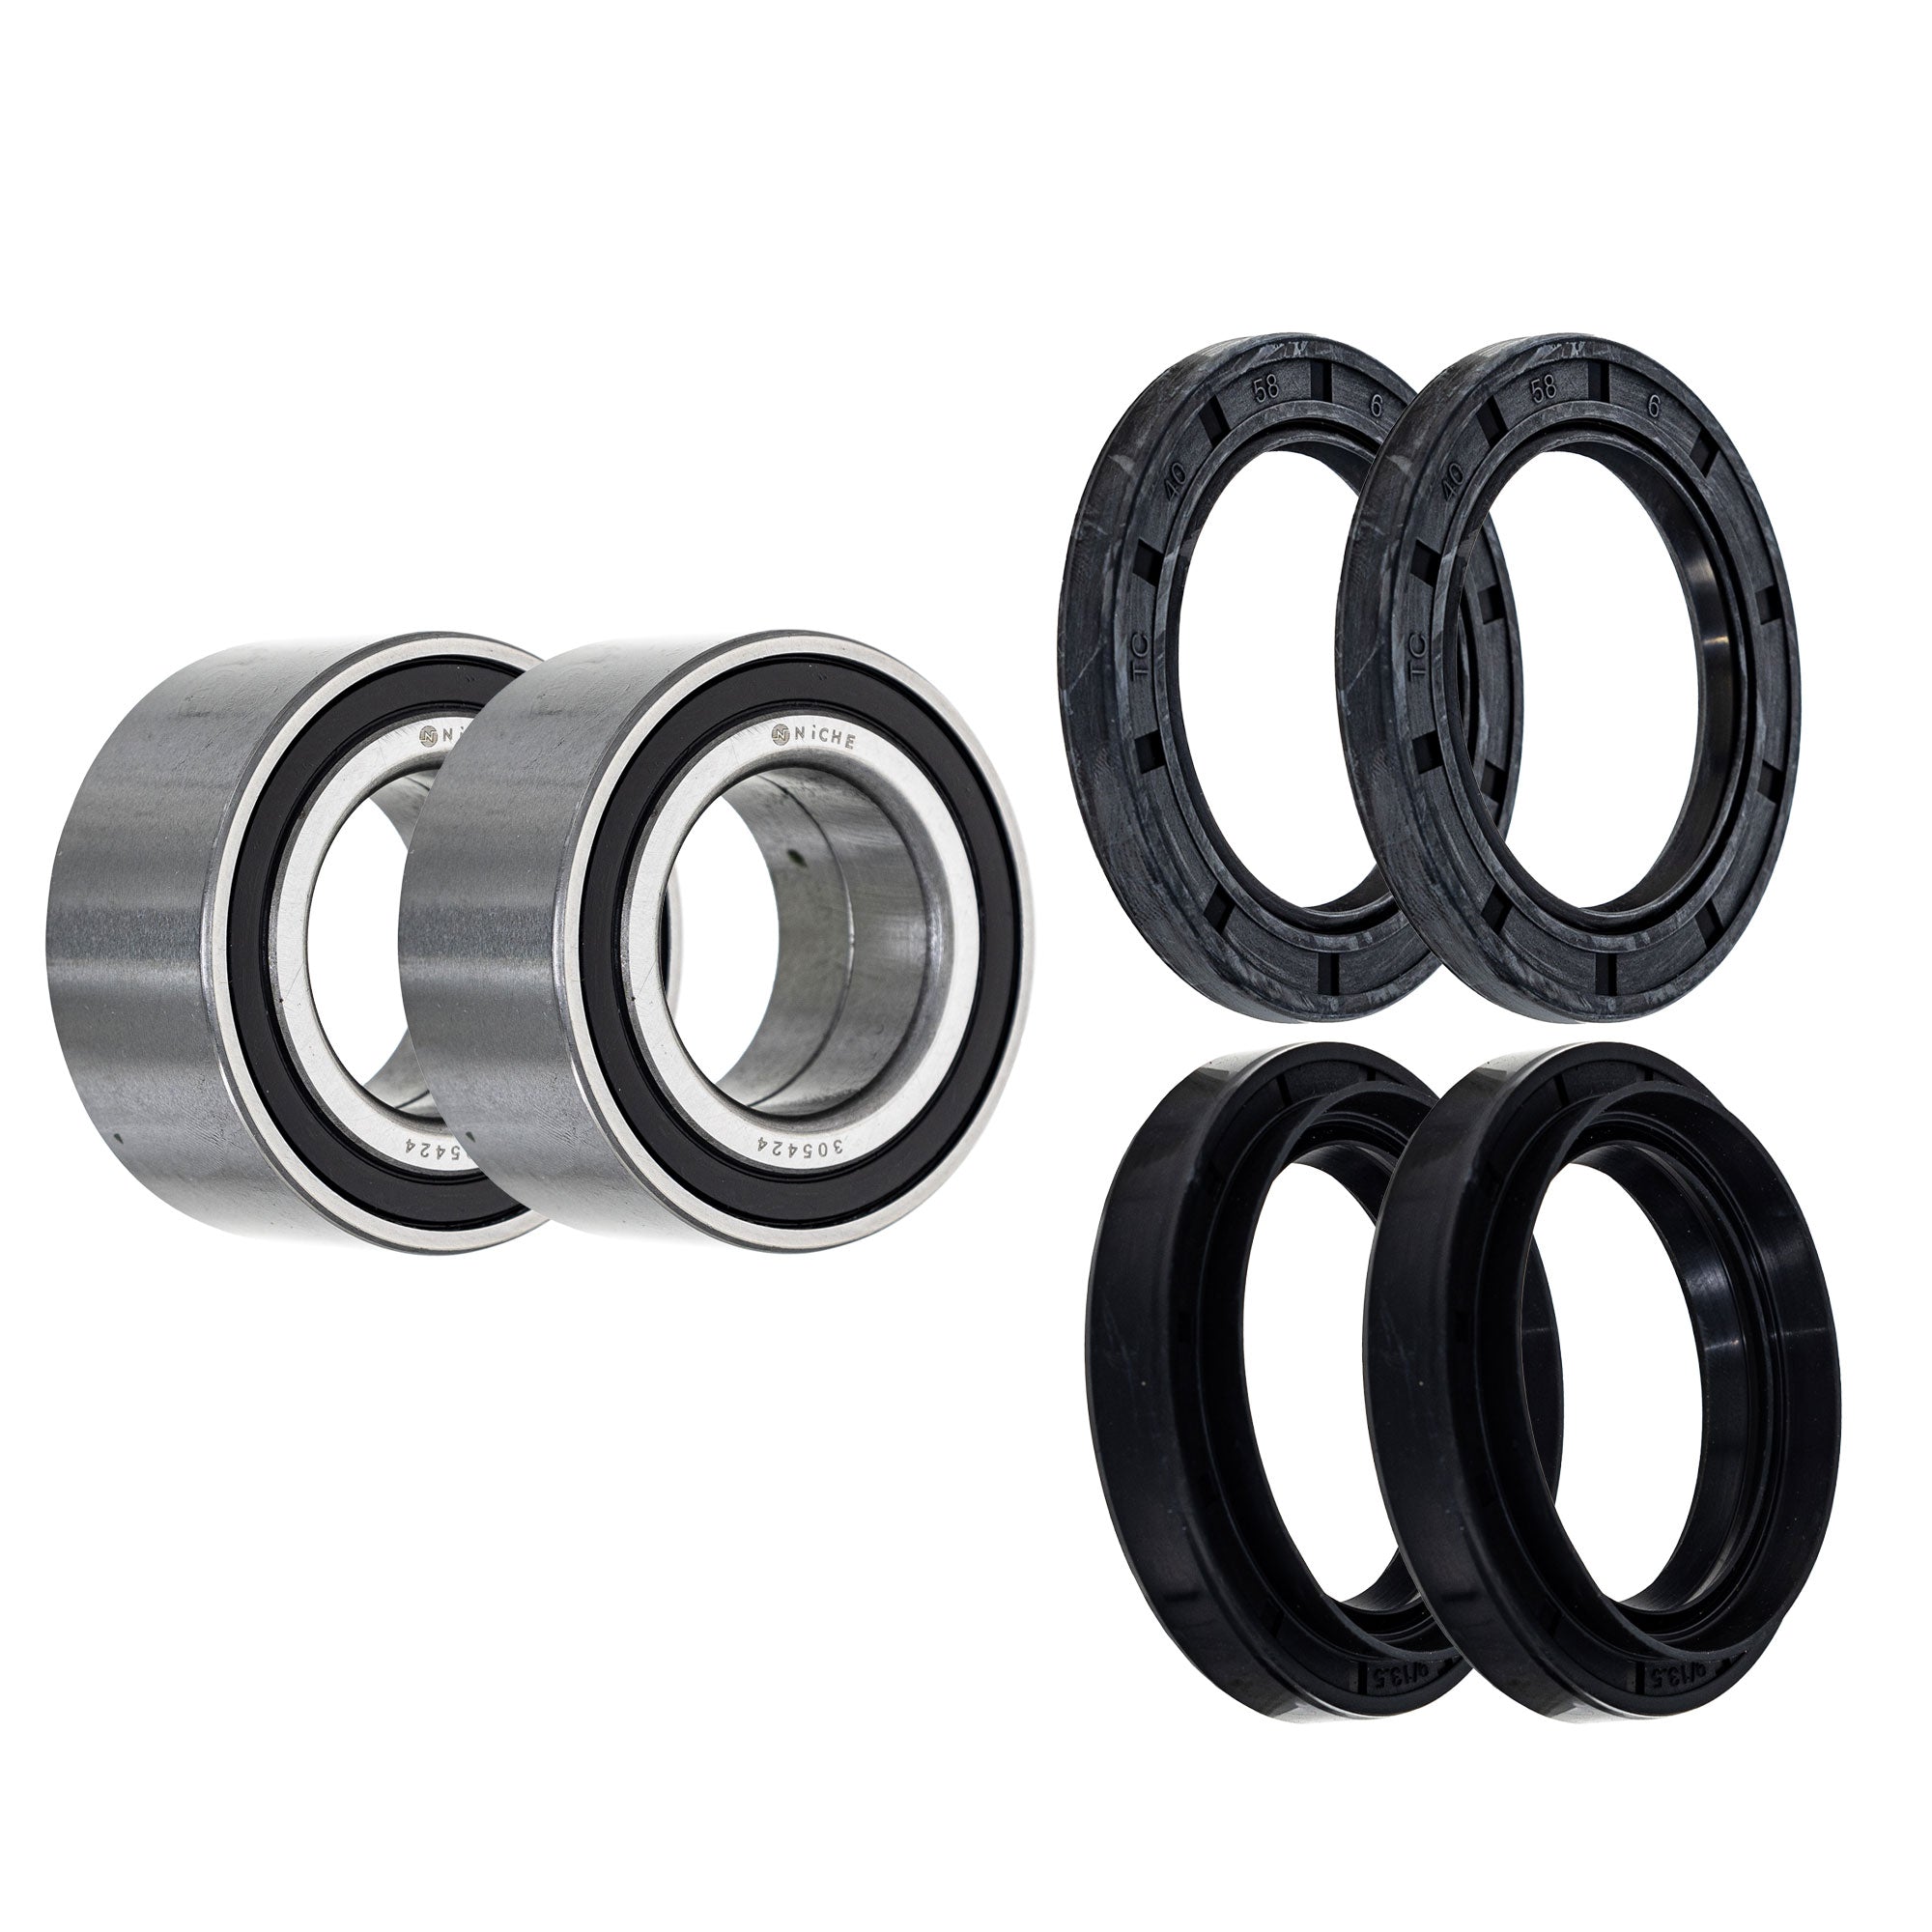 Wheel Bearing Seal Kit for zOTHER Traxter NICHE MK1008245